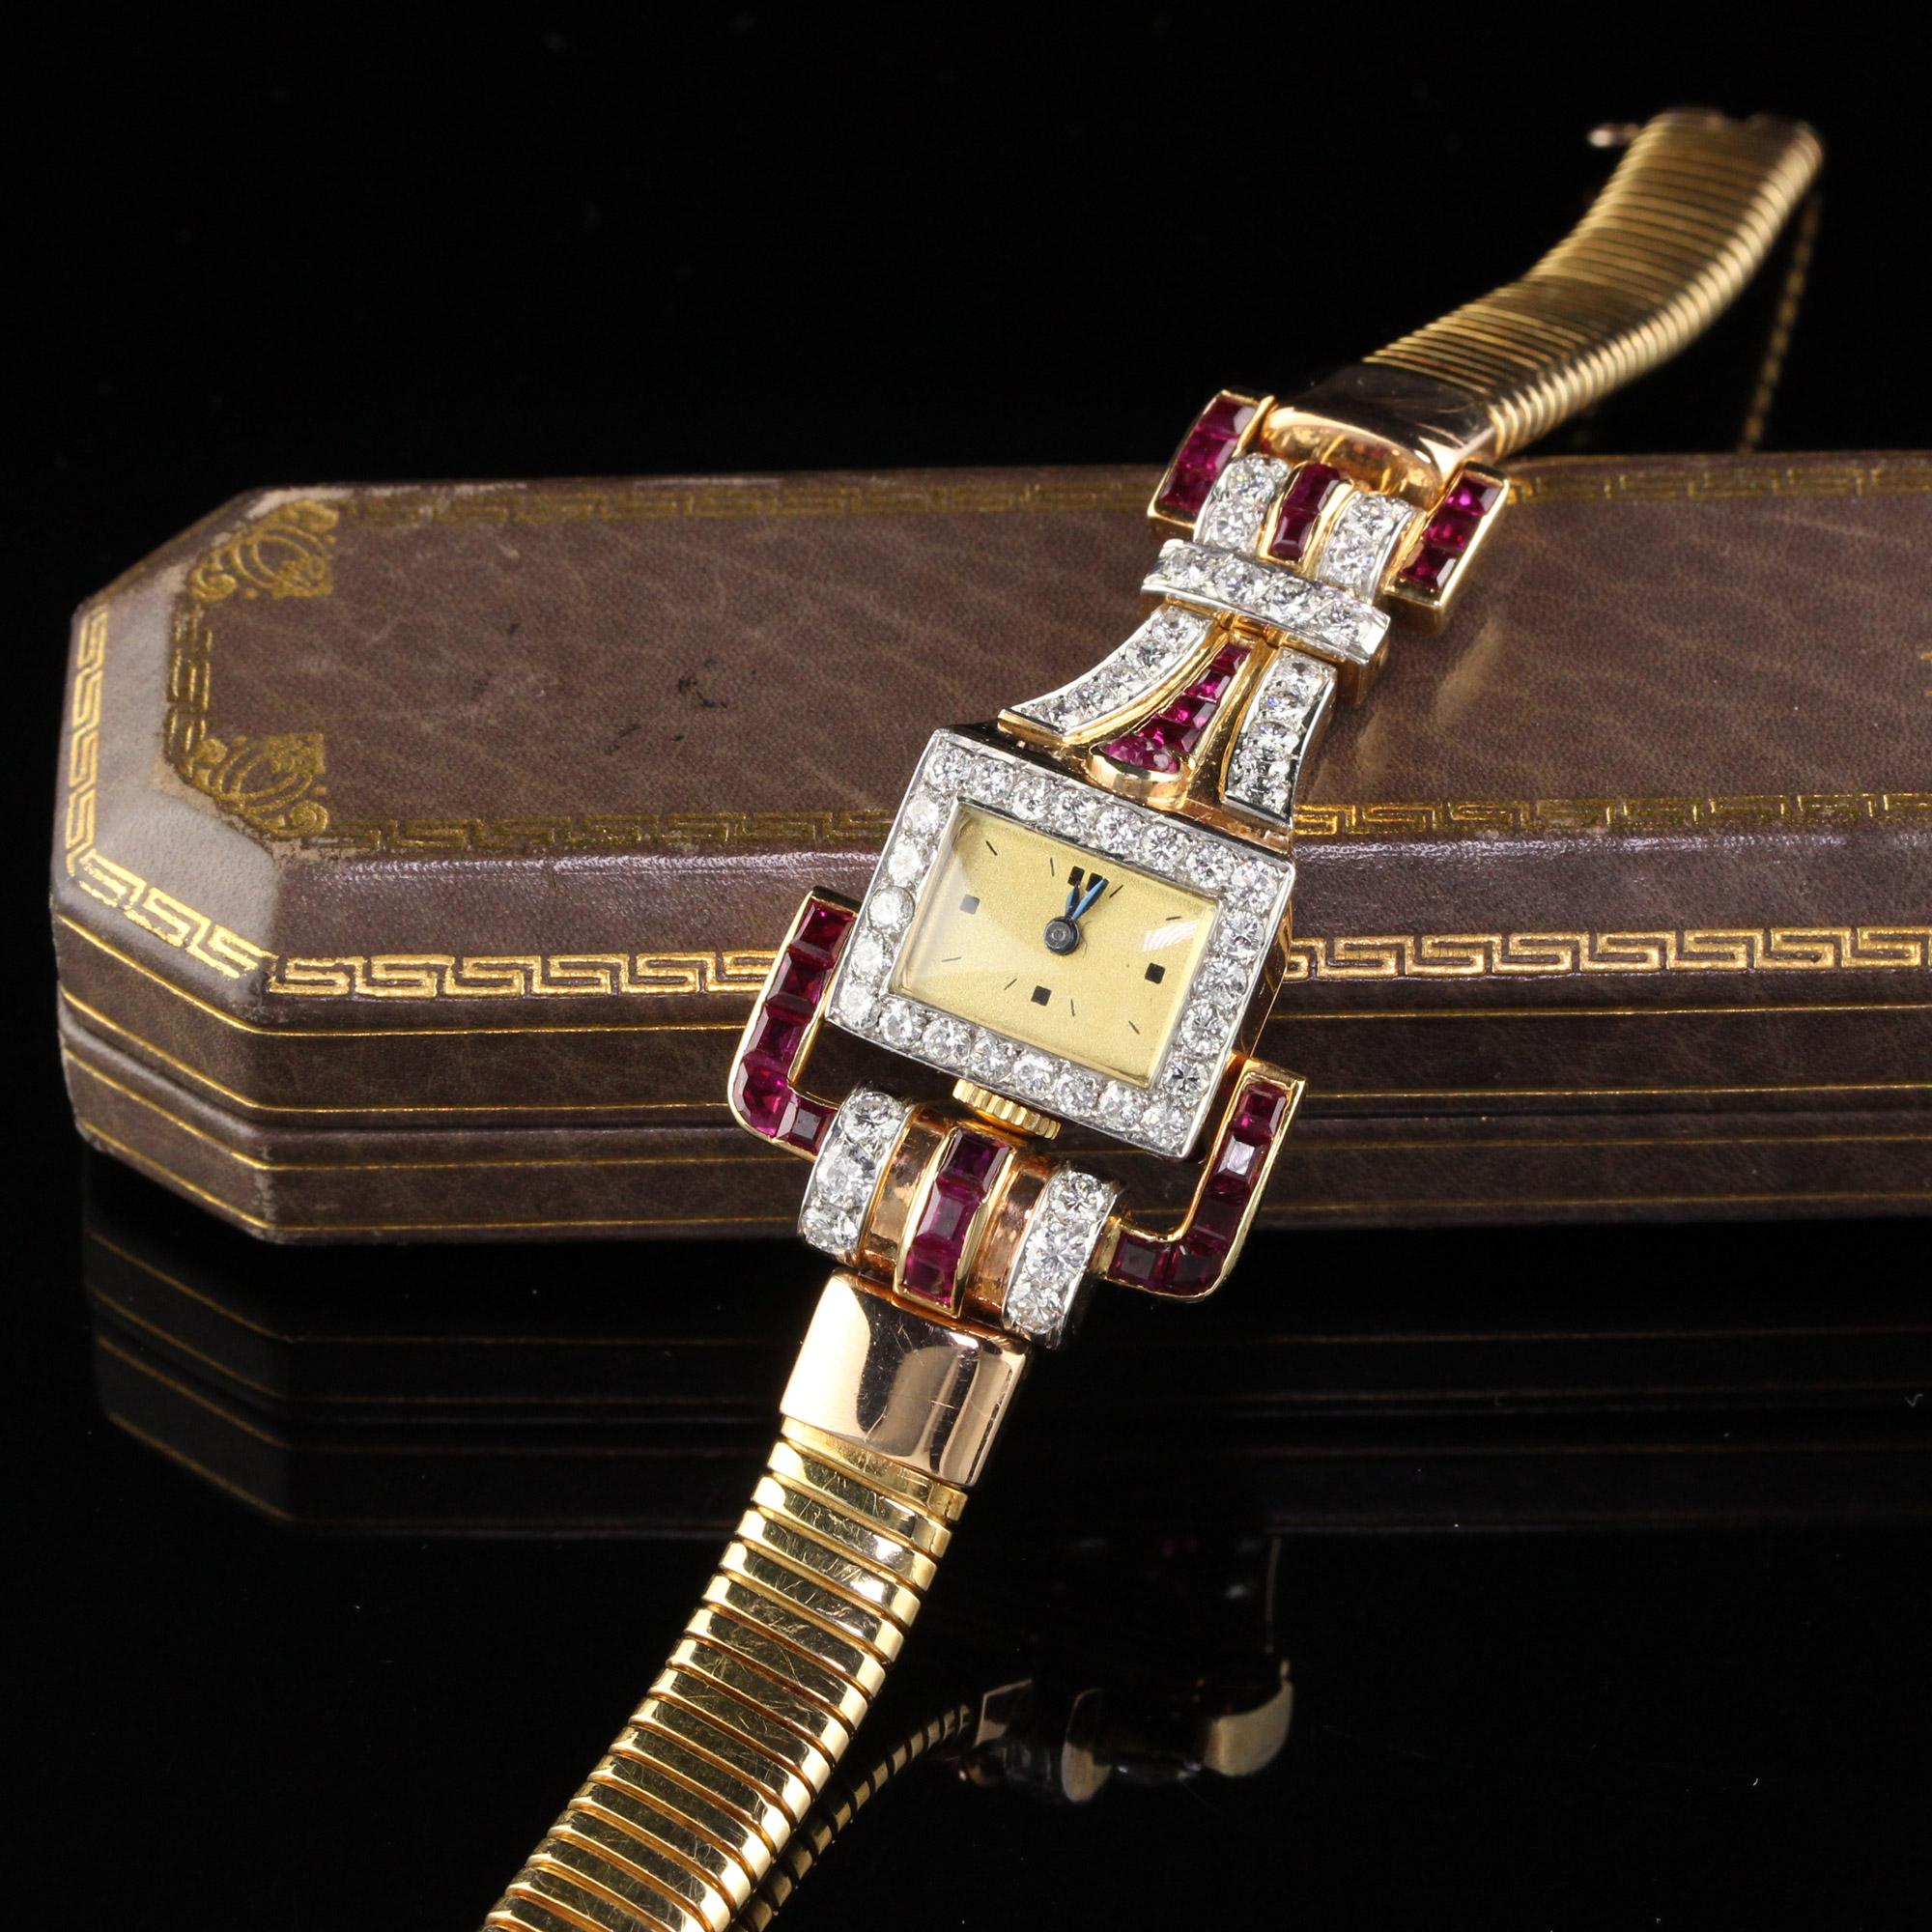 Vintage Retro yellow gold ladies wrist watch with diamonds and french cut rubies. In very good condition. 

Metal: 18K Yellow Gold

Weight: 43.7 Grams

Diamond Weight: Approximately 1.50 cts 

Diamond Color: G

Diamond Clarity: VS1

Measurements: 7